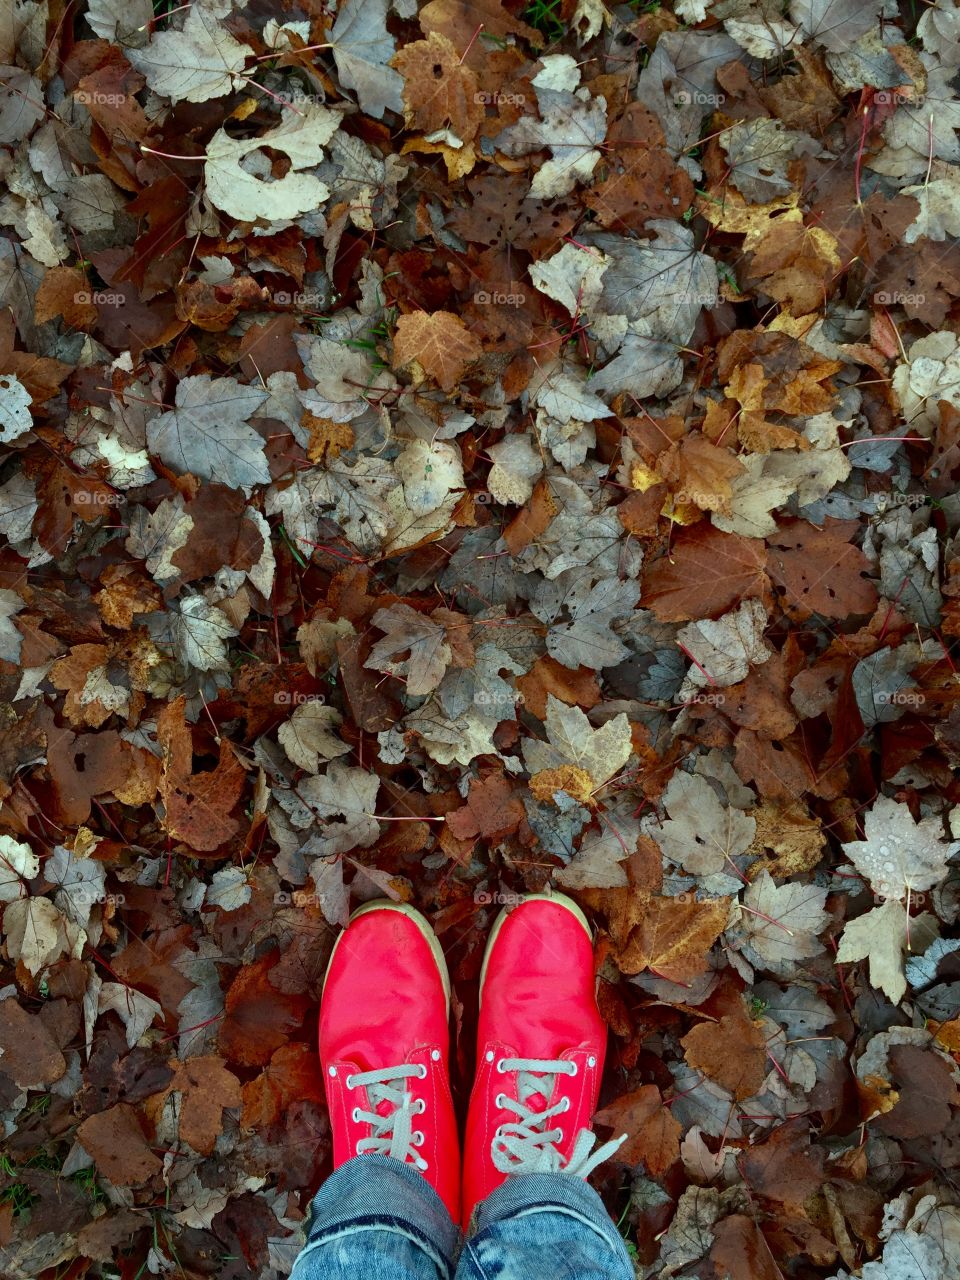 Fall is here, and this is the quintessential social media fall photo! Bright pink shoes help catch the eye of consumers, and fallen leaves add beautiful texture. 